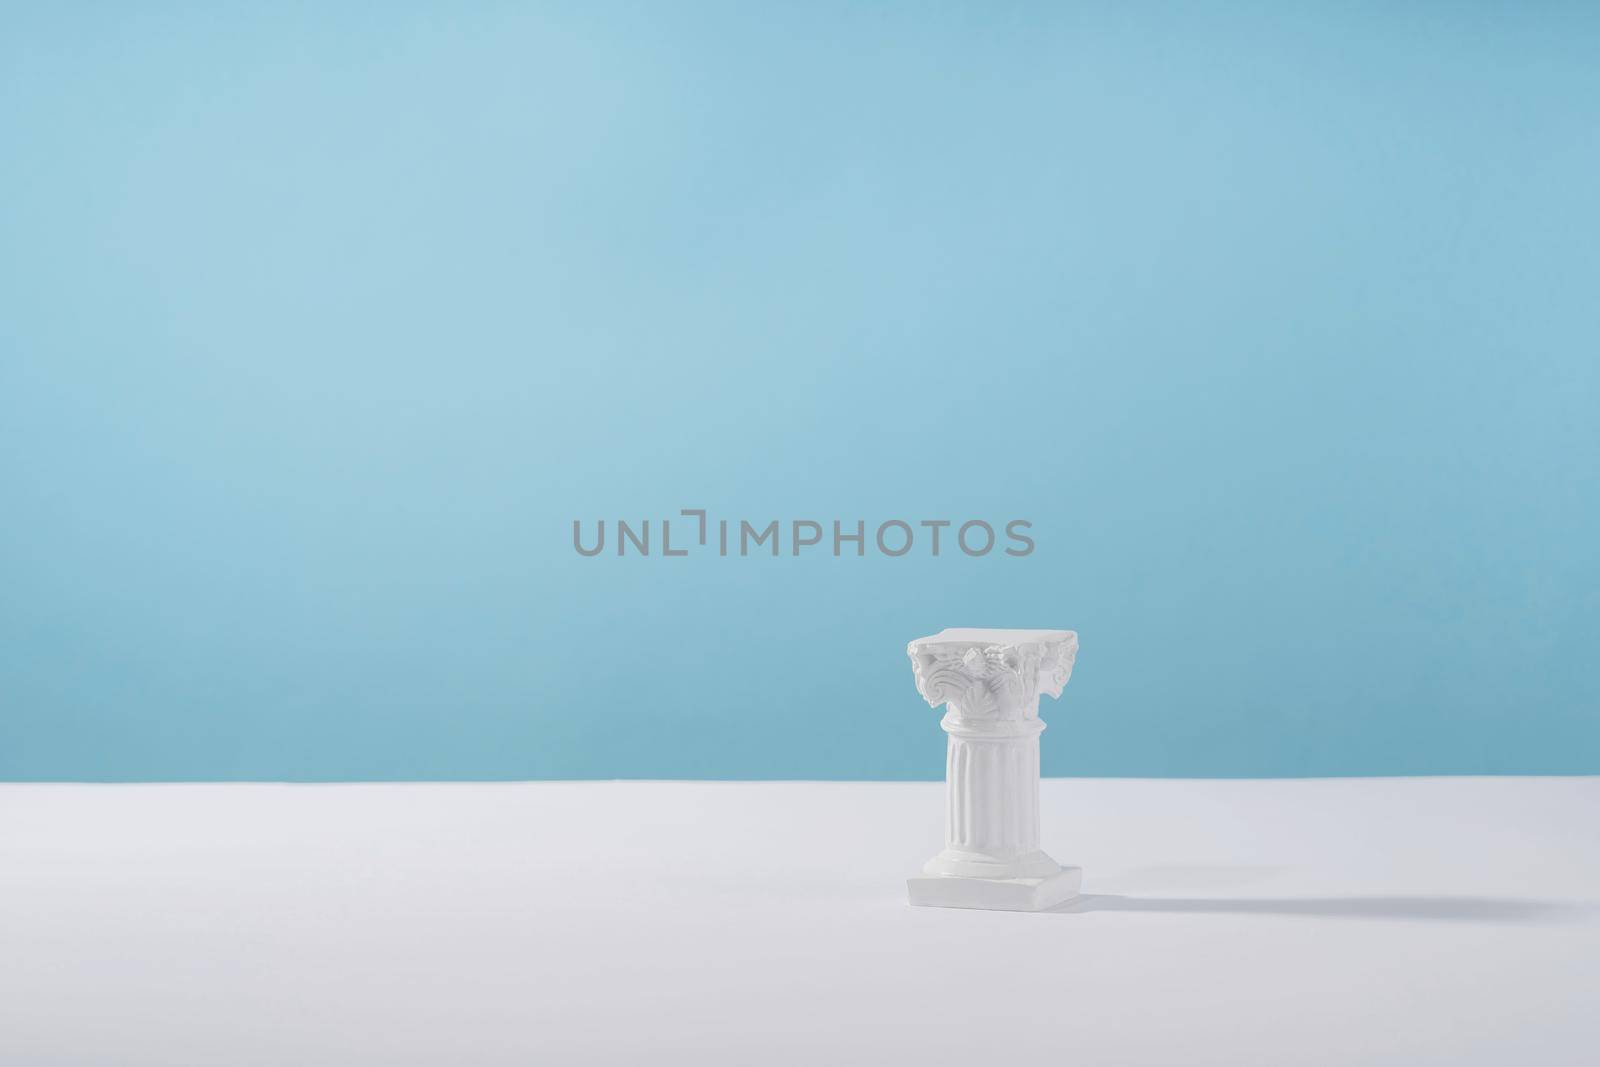 Cosmetic display podium platform roman marble column for product presentation, cosmetics geometric stand stylish props, mockup scene aesthetic on blue. Creative product stage by photolime